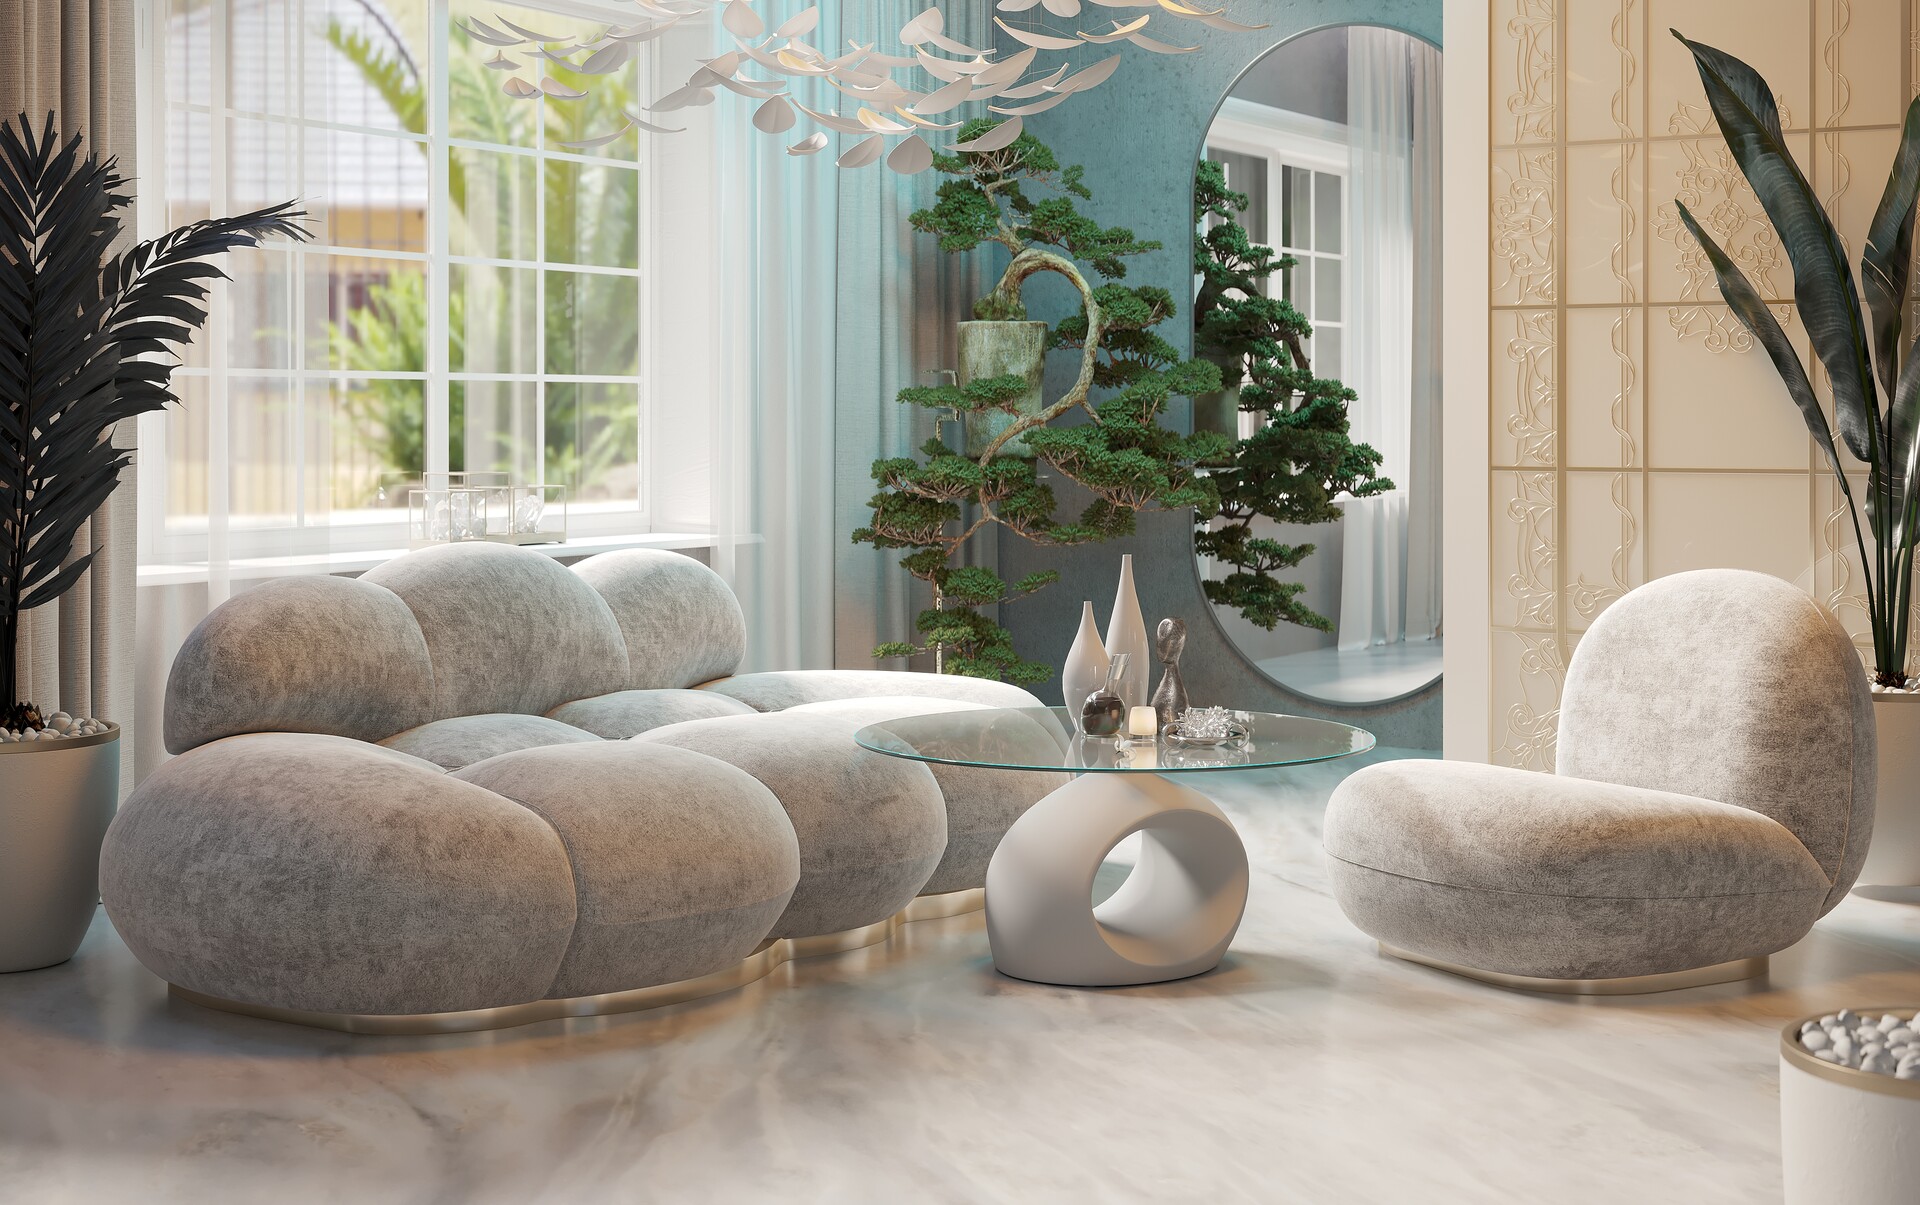 ArtStation - Hall design in country villa with cloud sofa